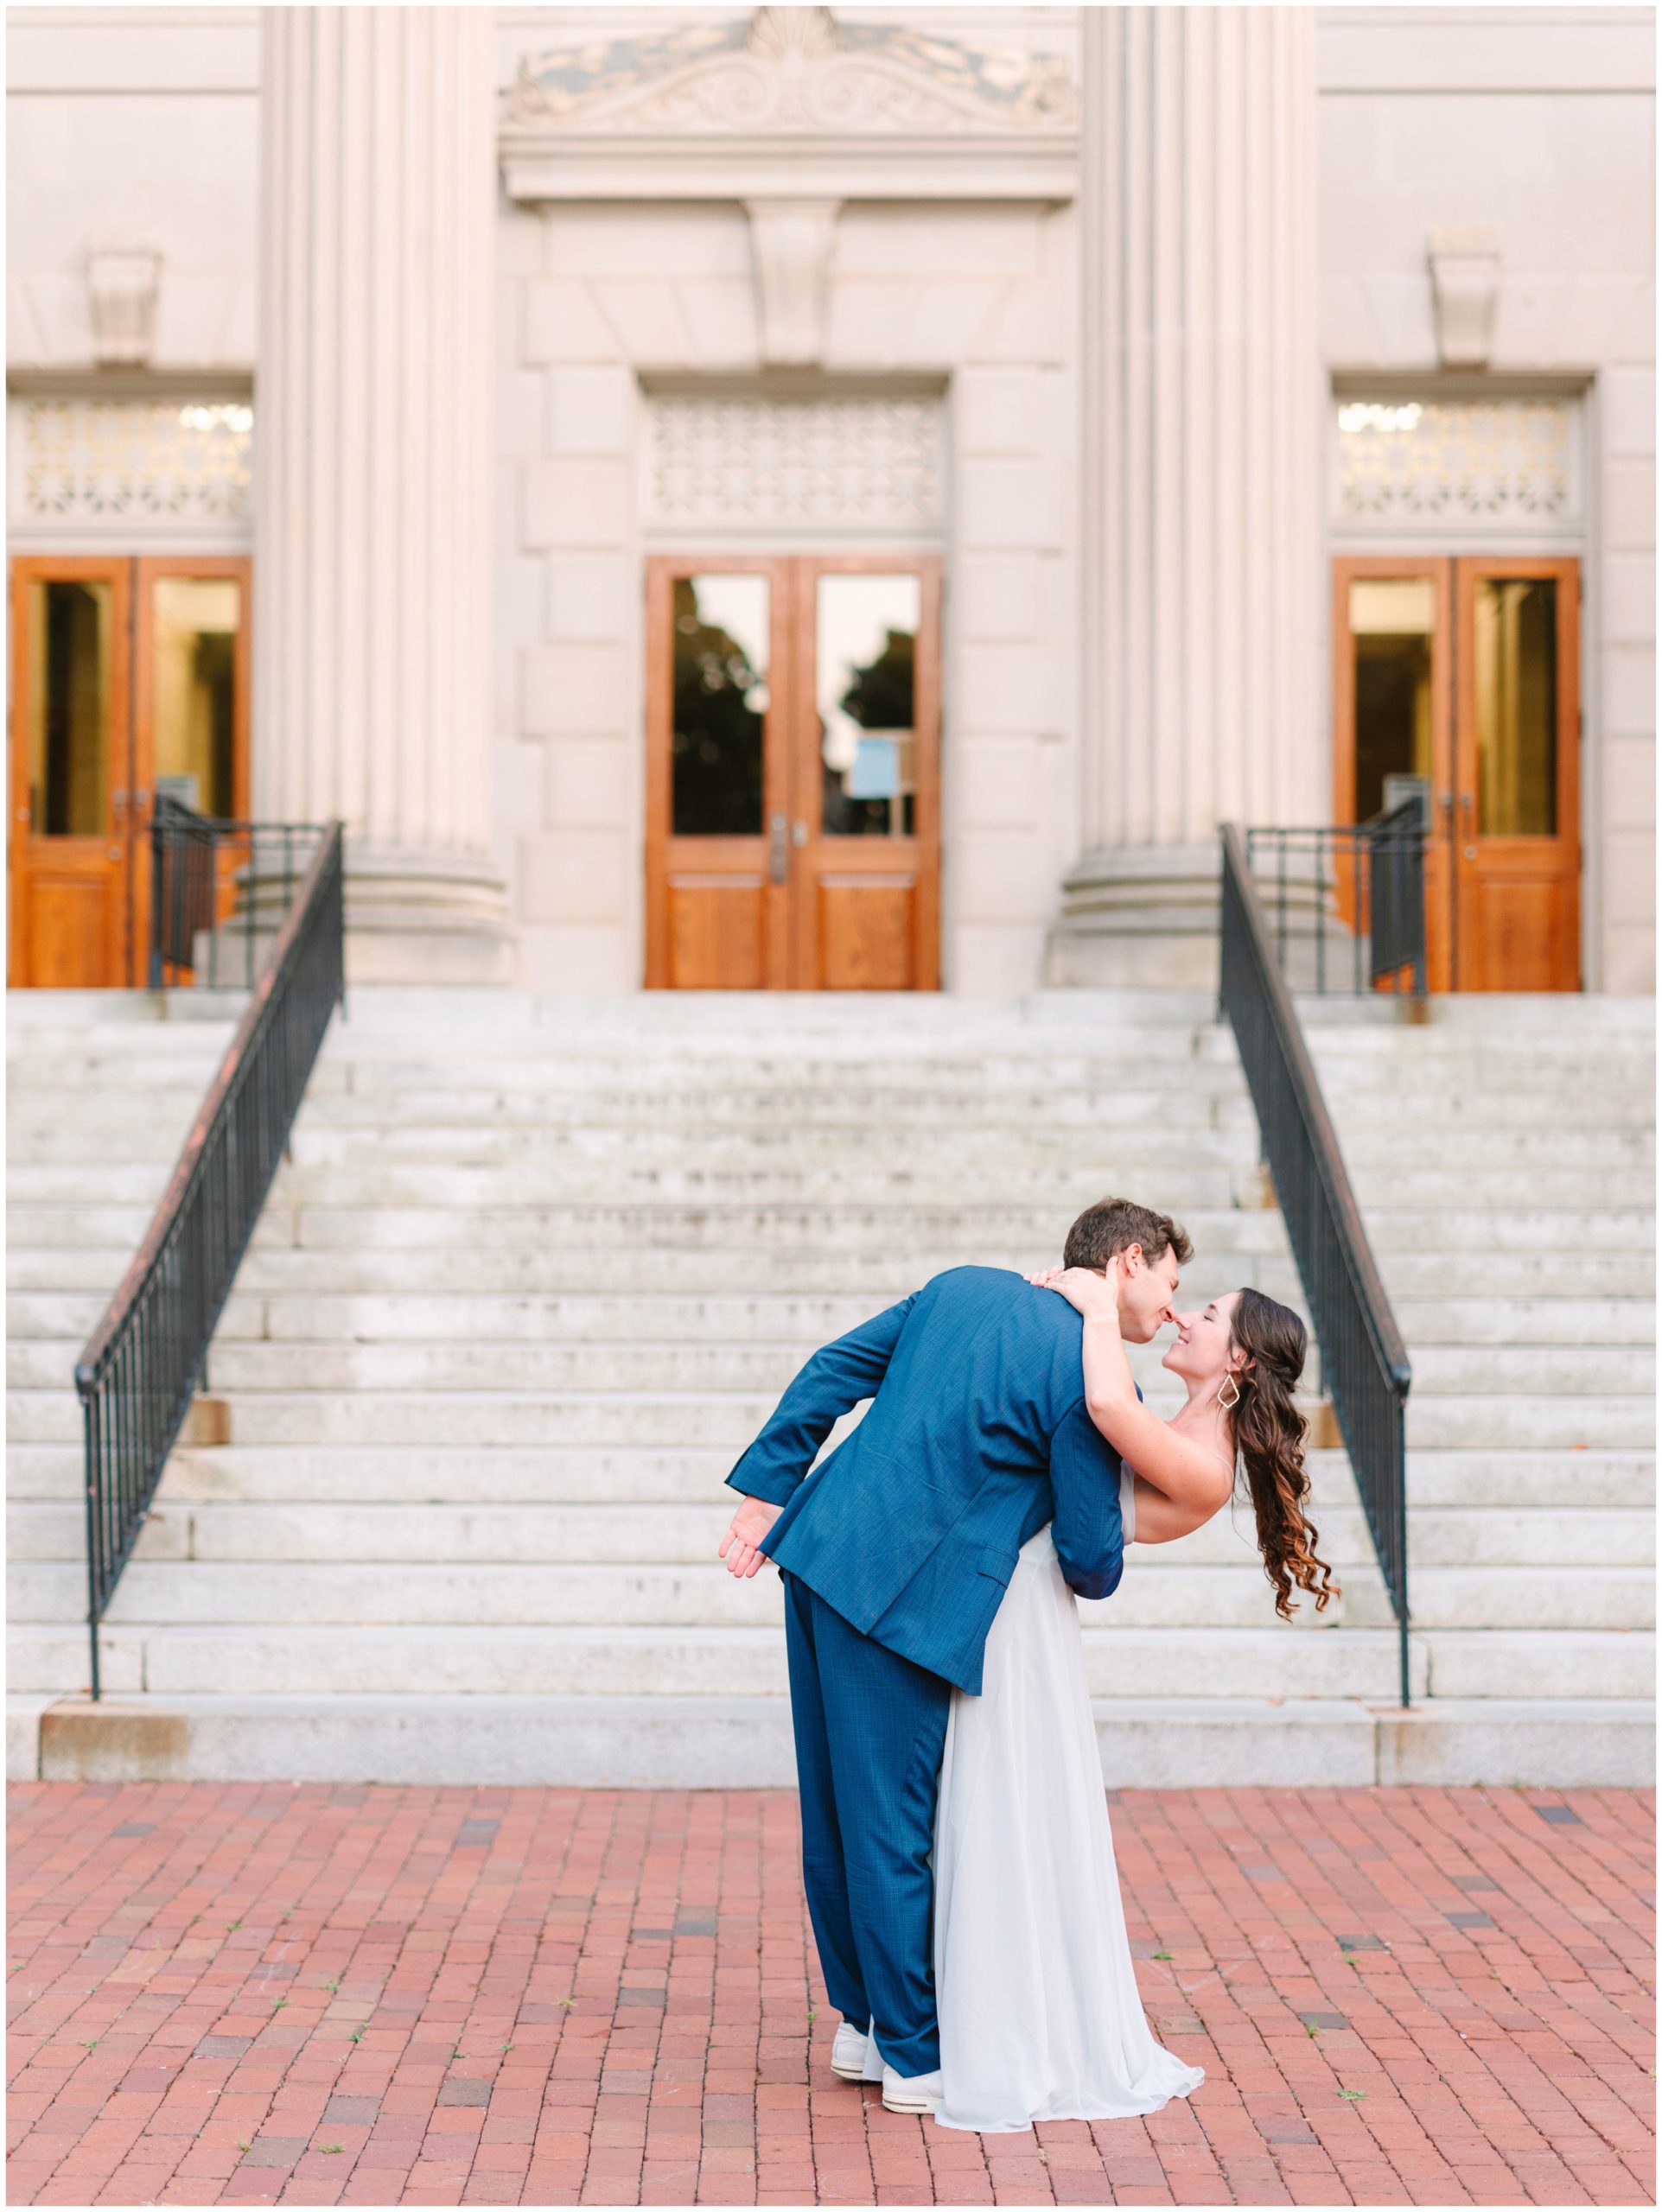 Engagement session tips from a wedding photographer 